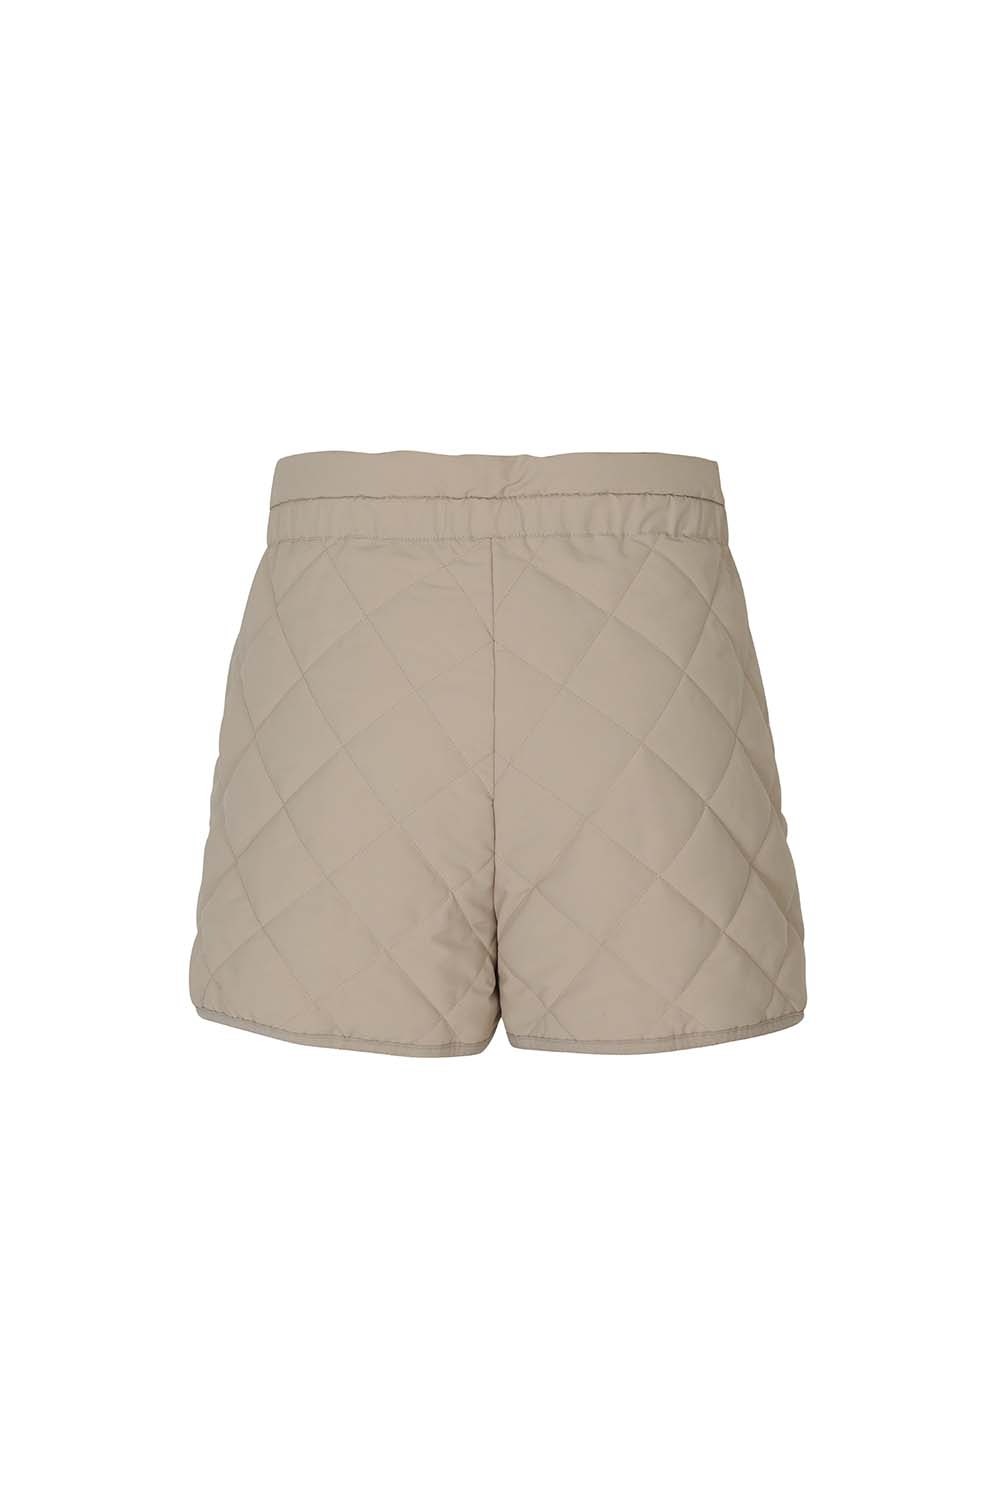 3M THINSULATE DOLPHIN SHORTS_Beige